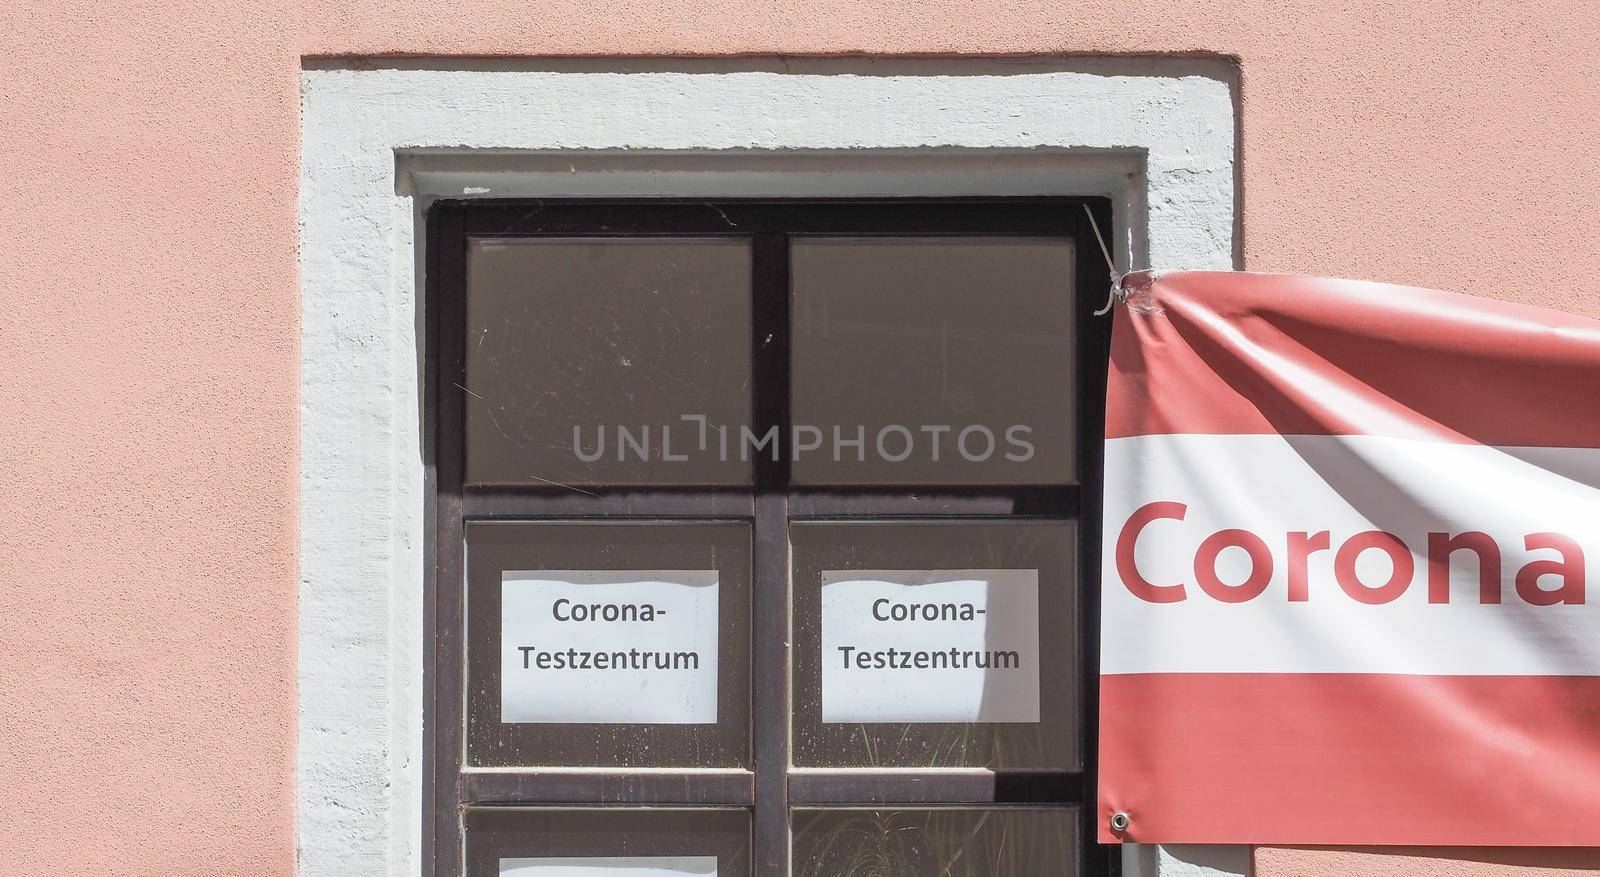 Corona test centre in Nuernberg by claudiodivizia